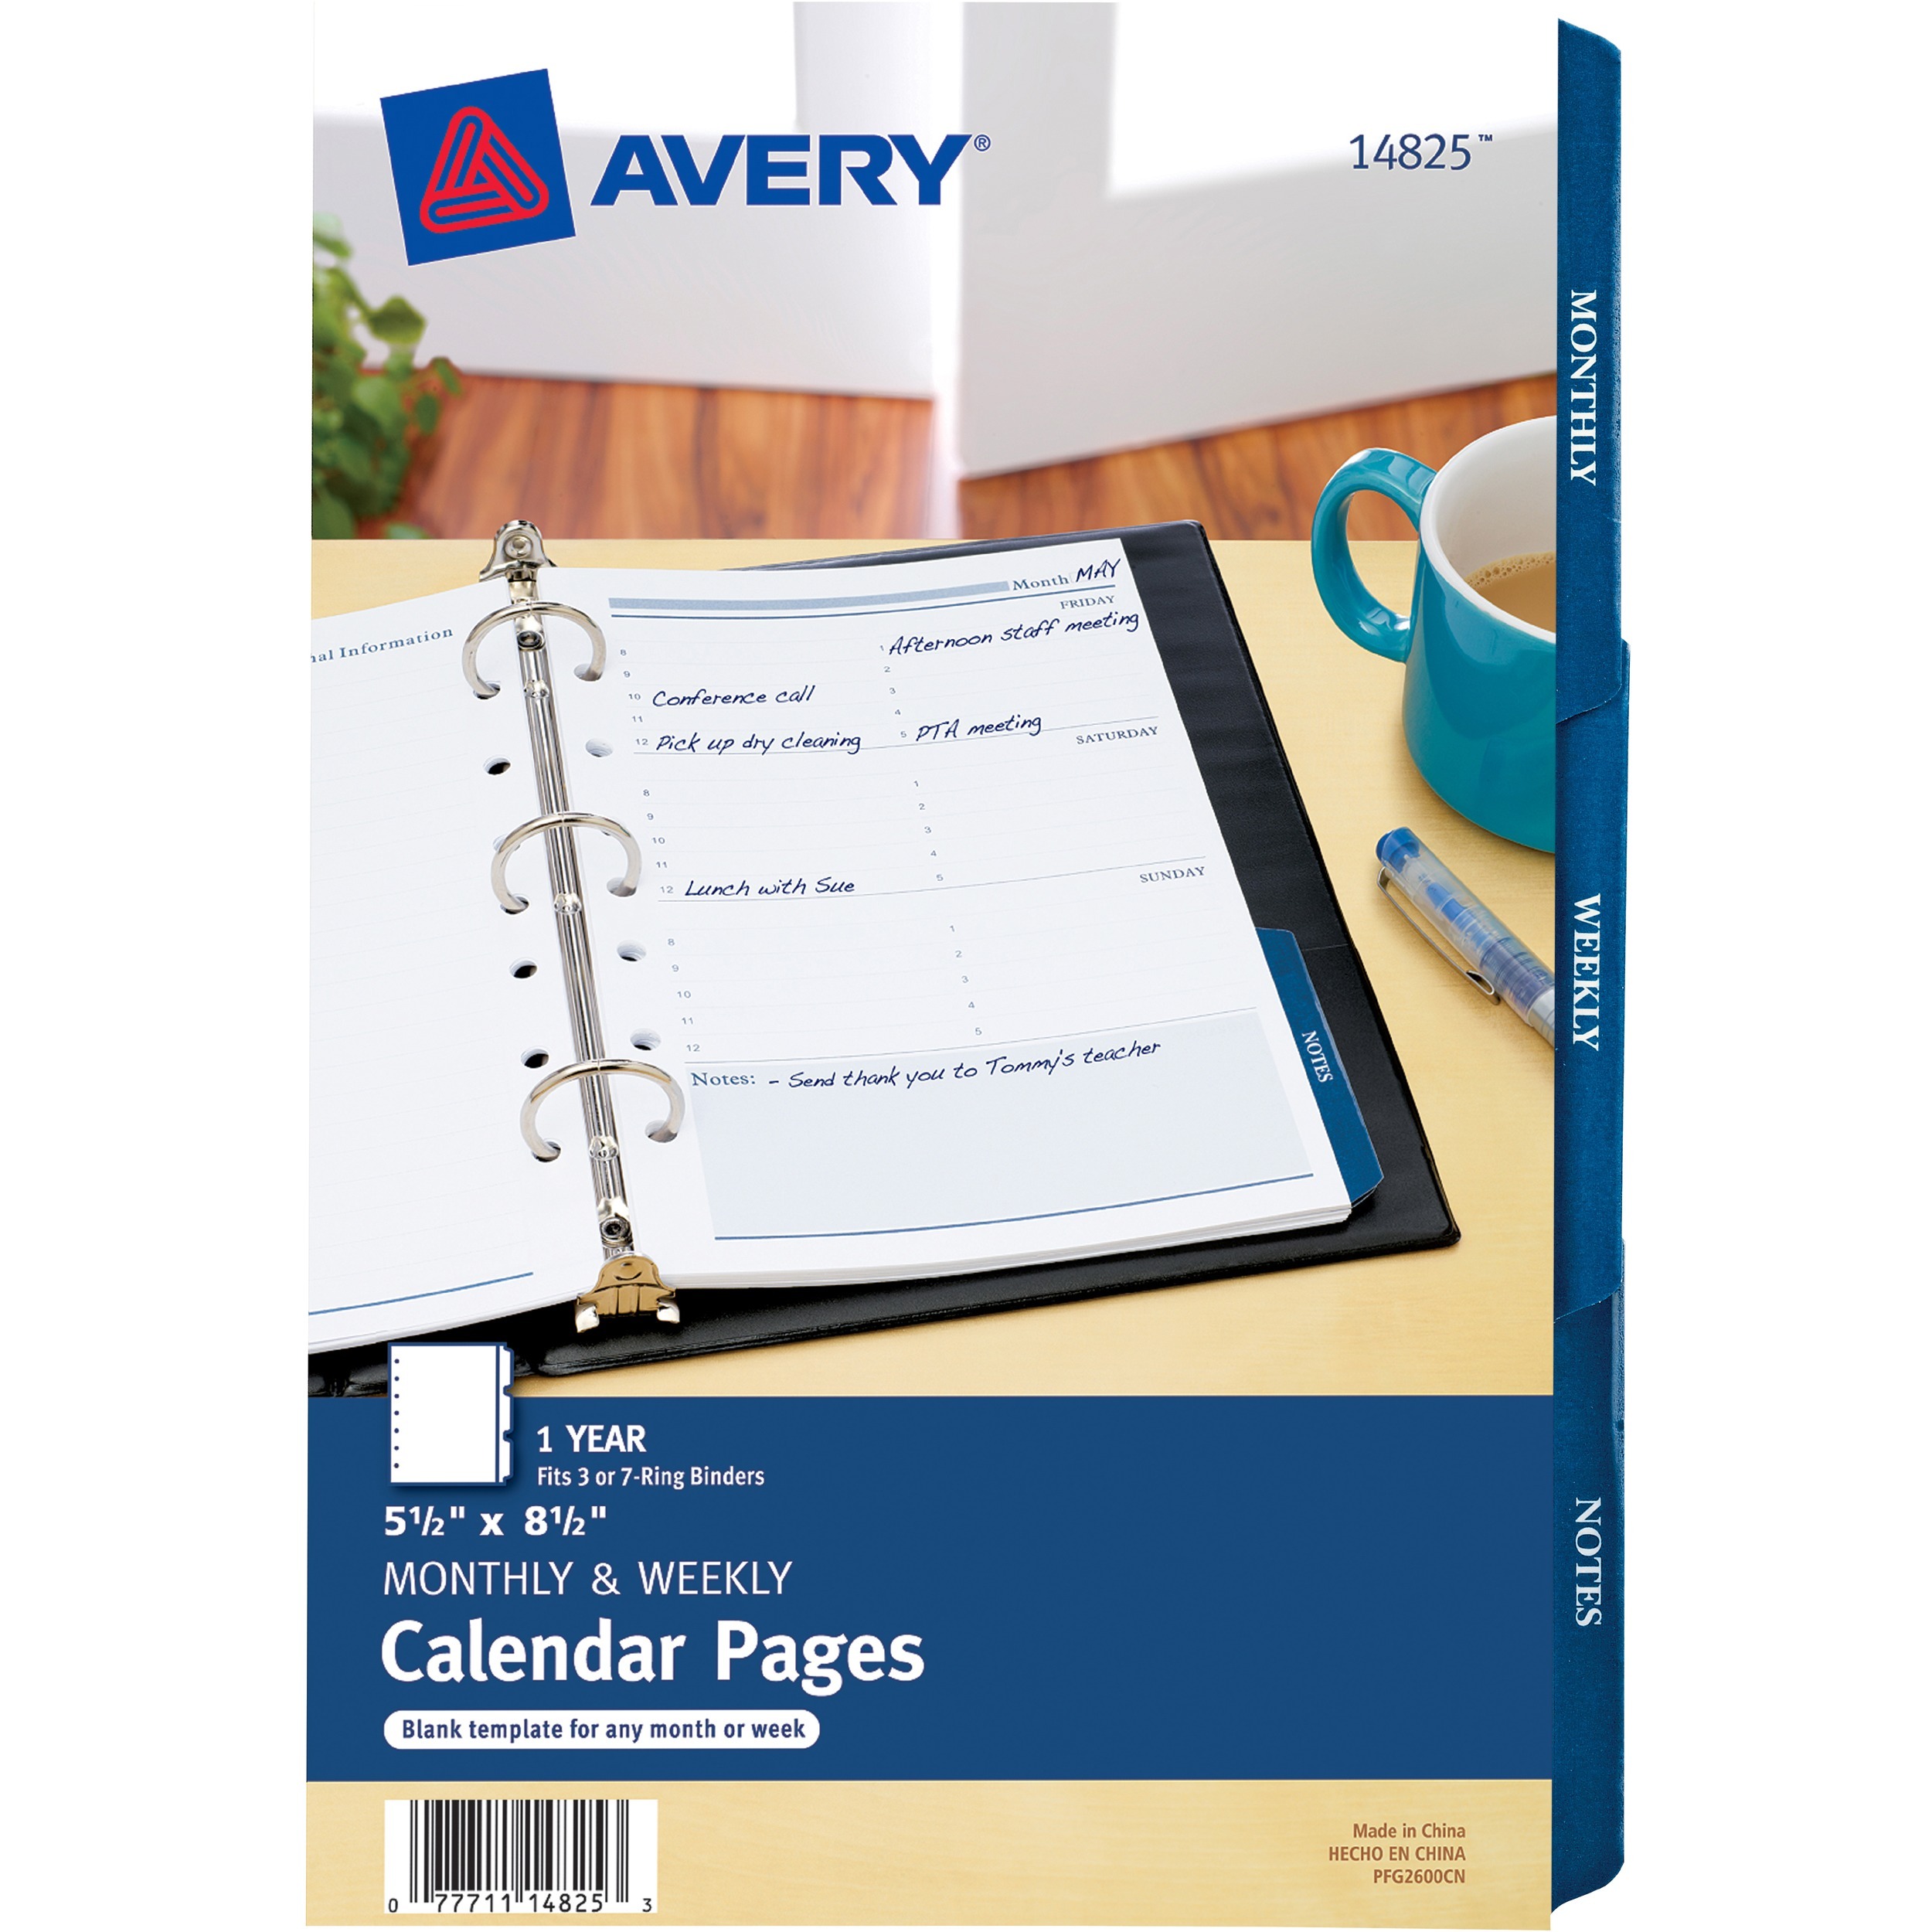 Avery® 5 5 quot x 8 5 quot Mini Calendar Pages Fits 3 Ring/7 Ring Binders